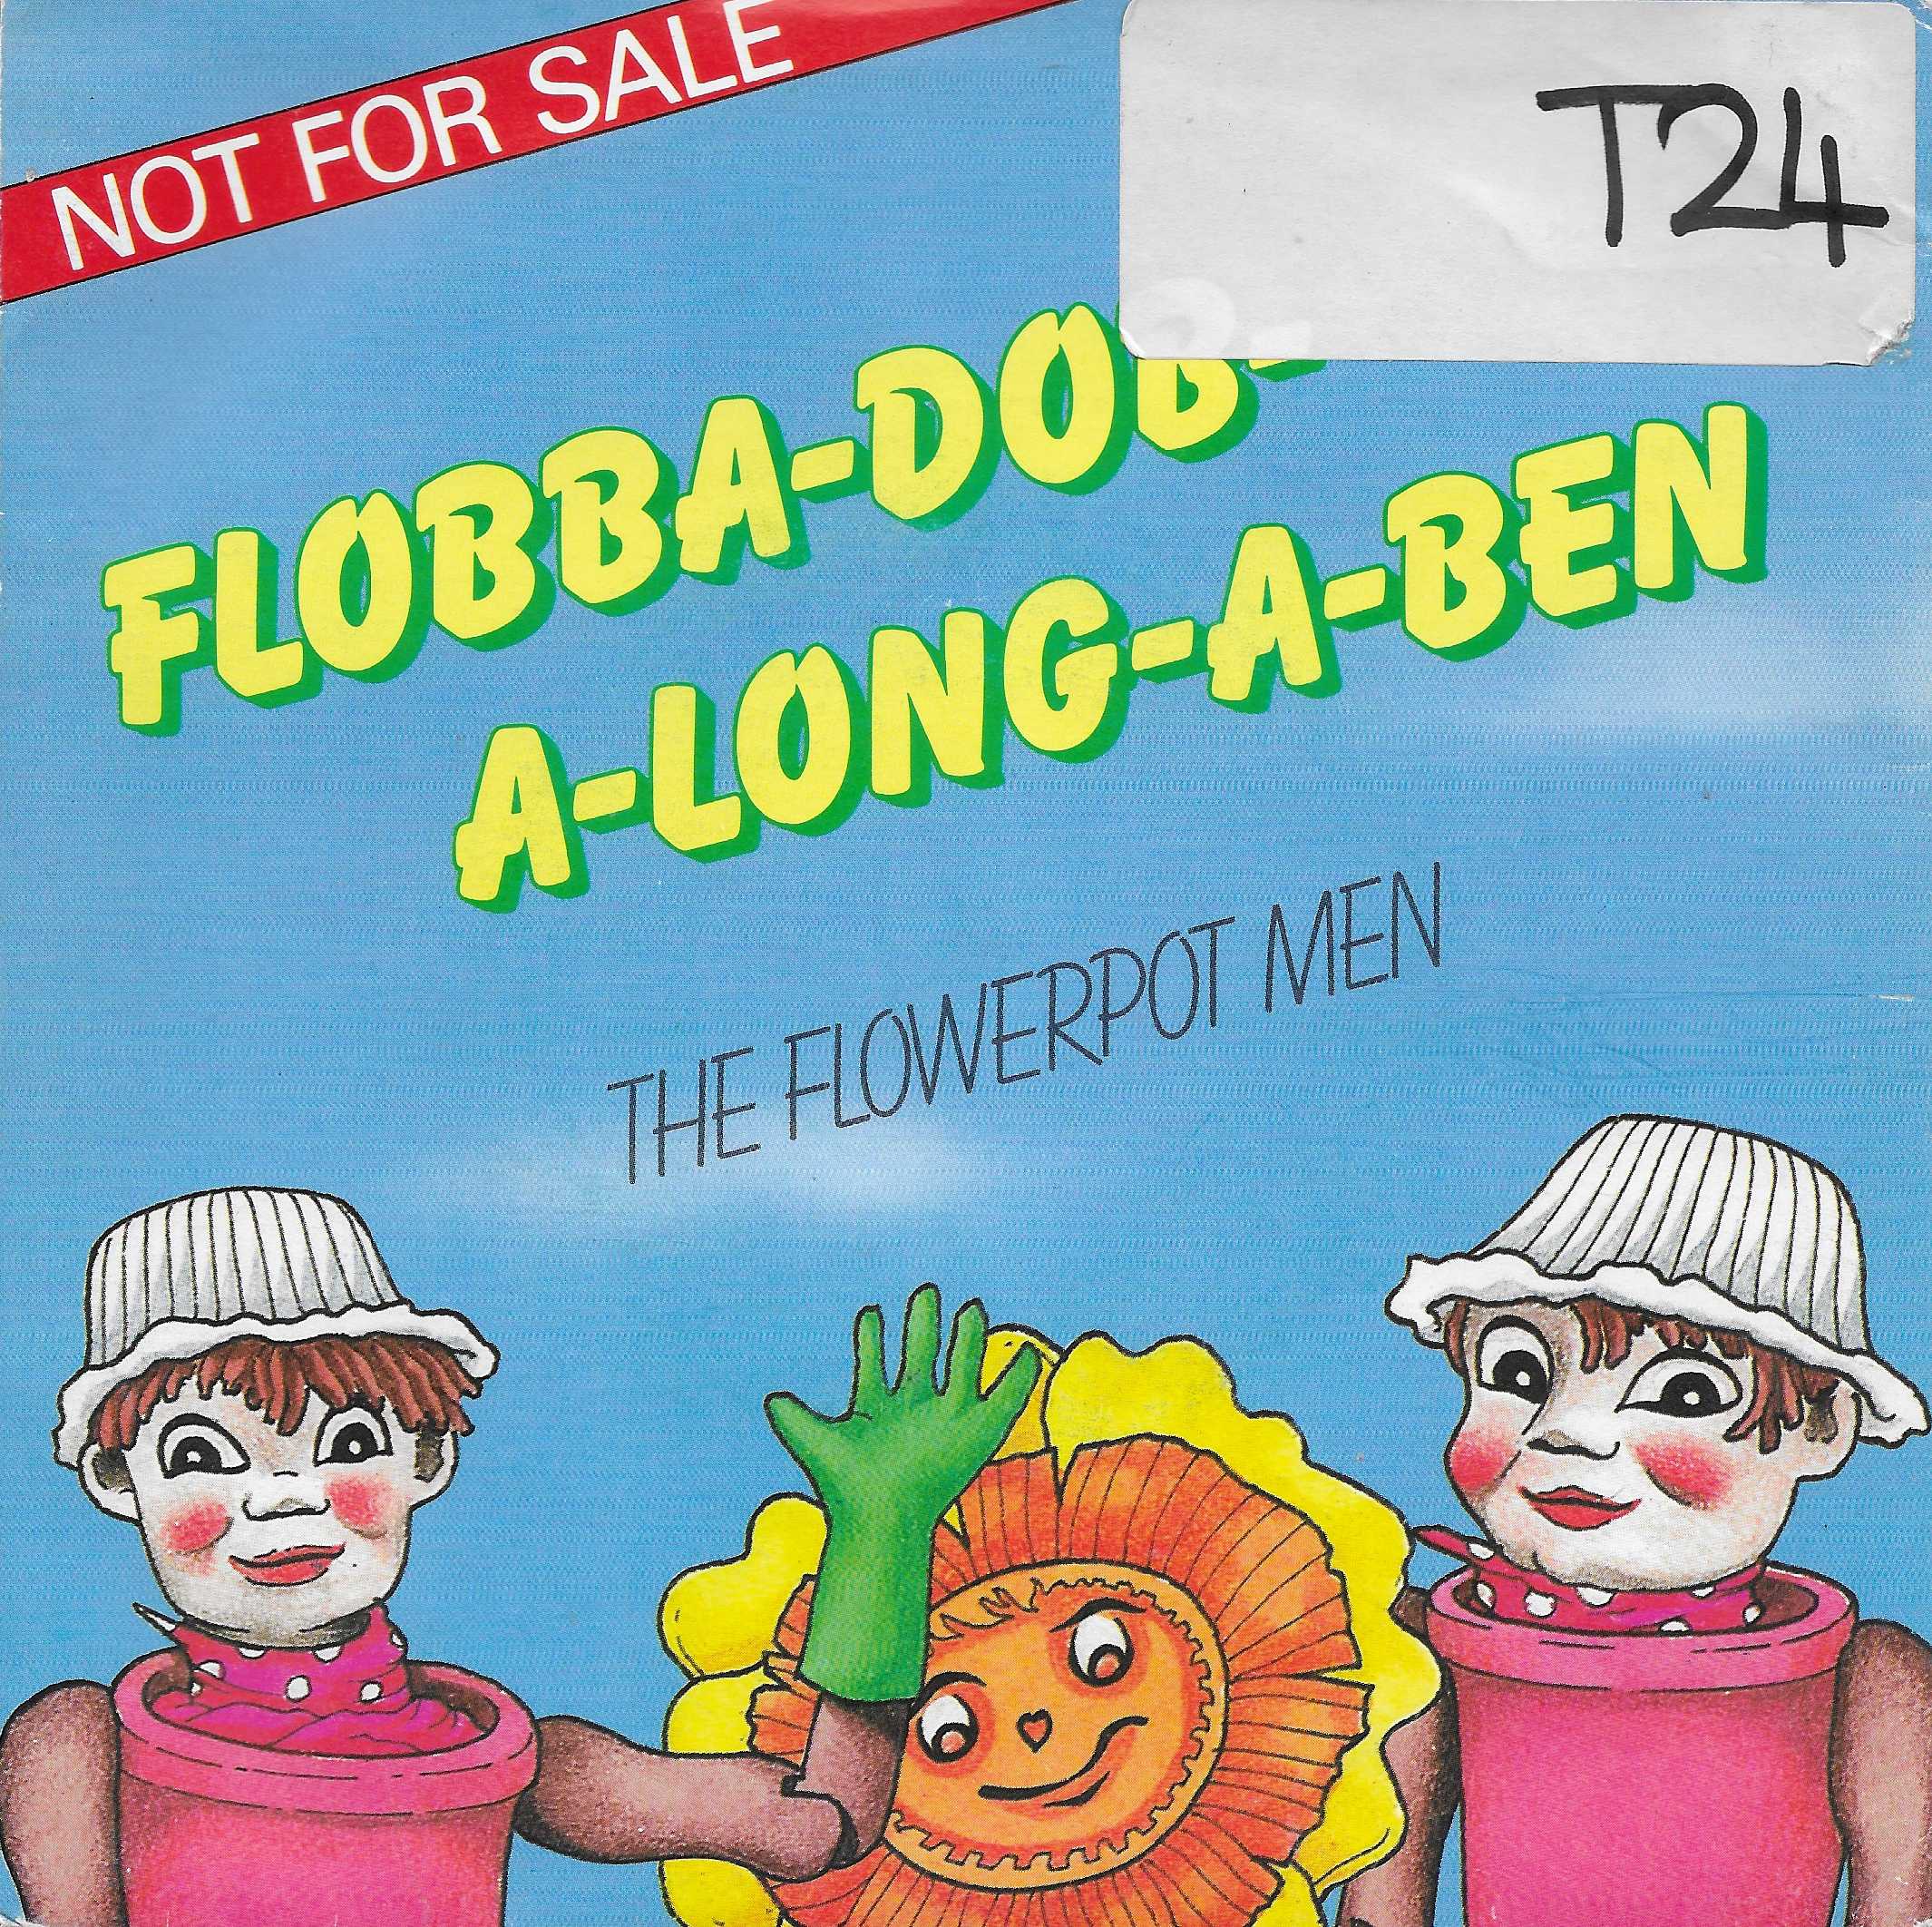 Picture of FLOB 1 Flobba-Dob-A-Long-A-Ben (The Flower Pot Men) by artist Grahame Lister / John OConnor from the BBC singles - Records and Tapes library